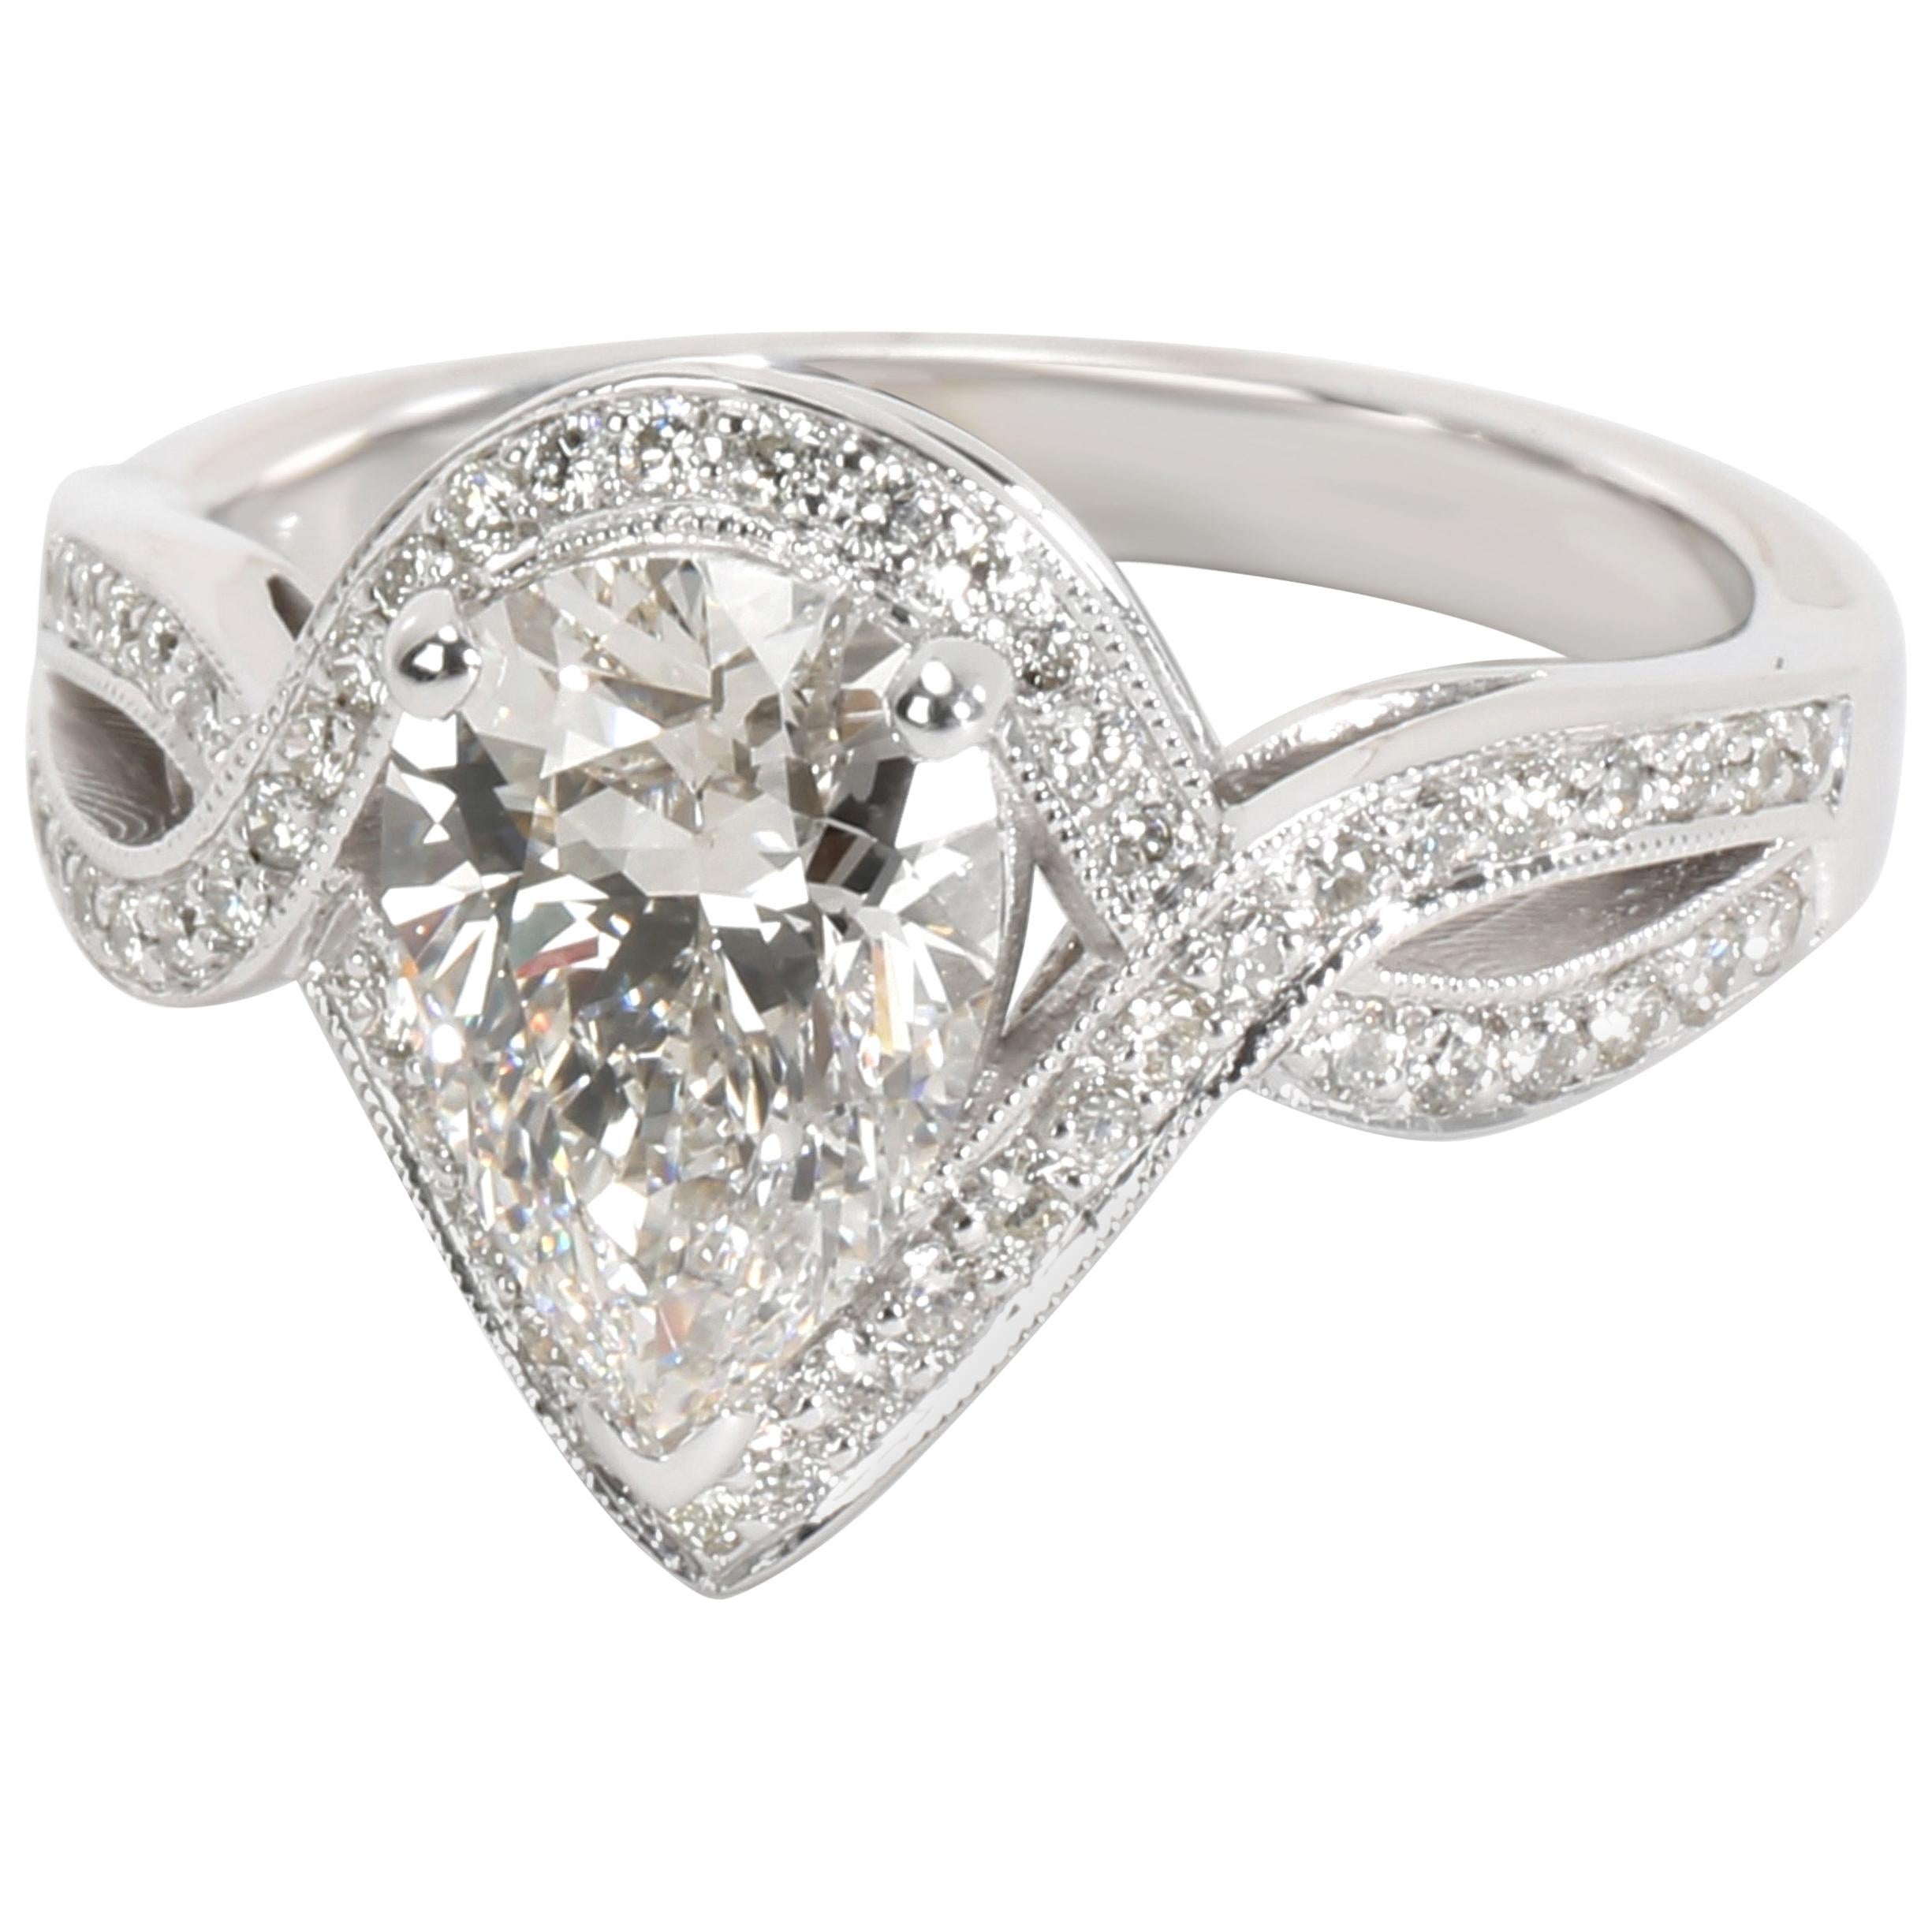 GIA Certified Halo Pear Shape Diamond Engagement Ring in 14K White Gold 2.05 CTW